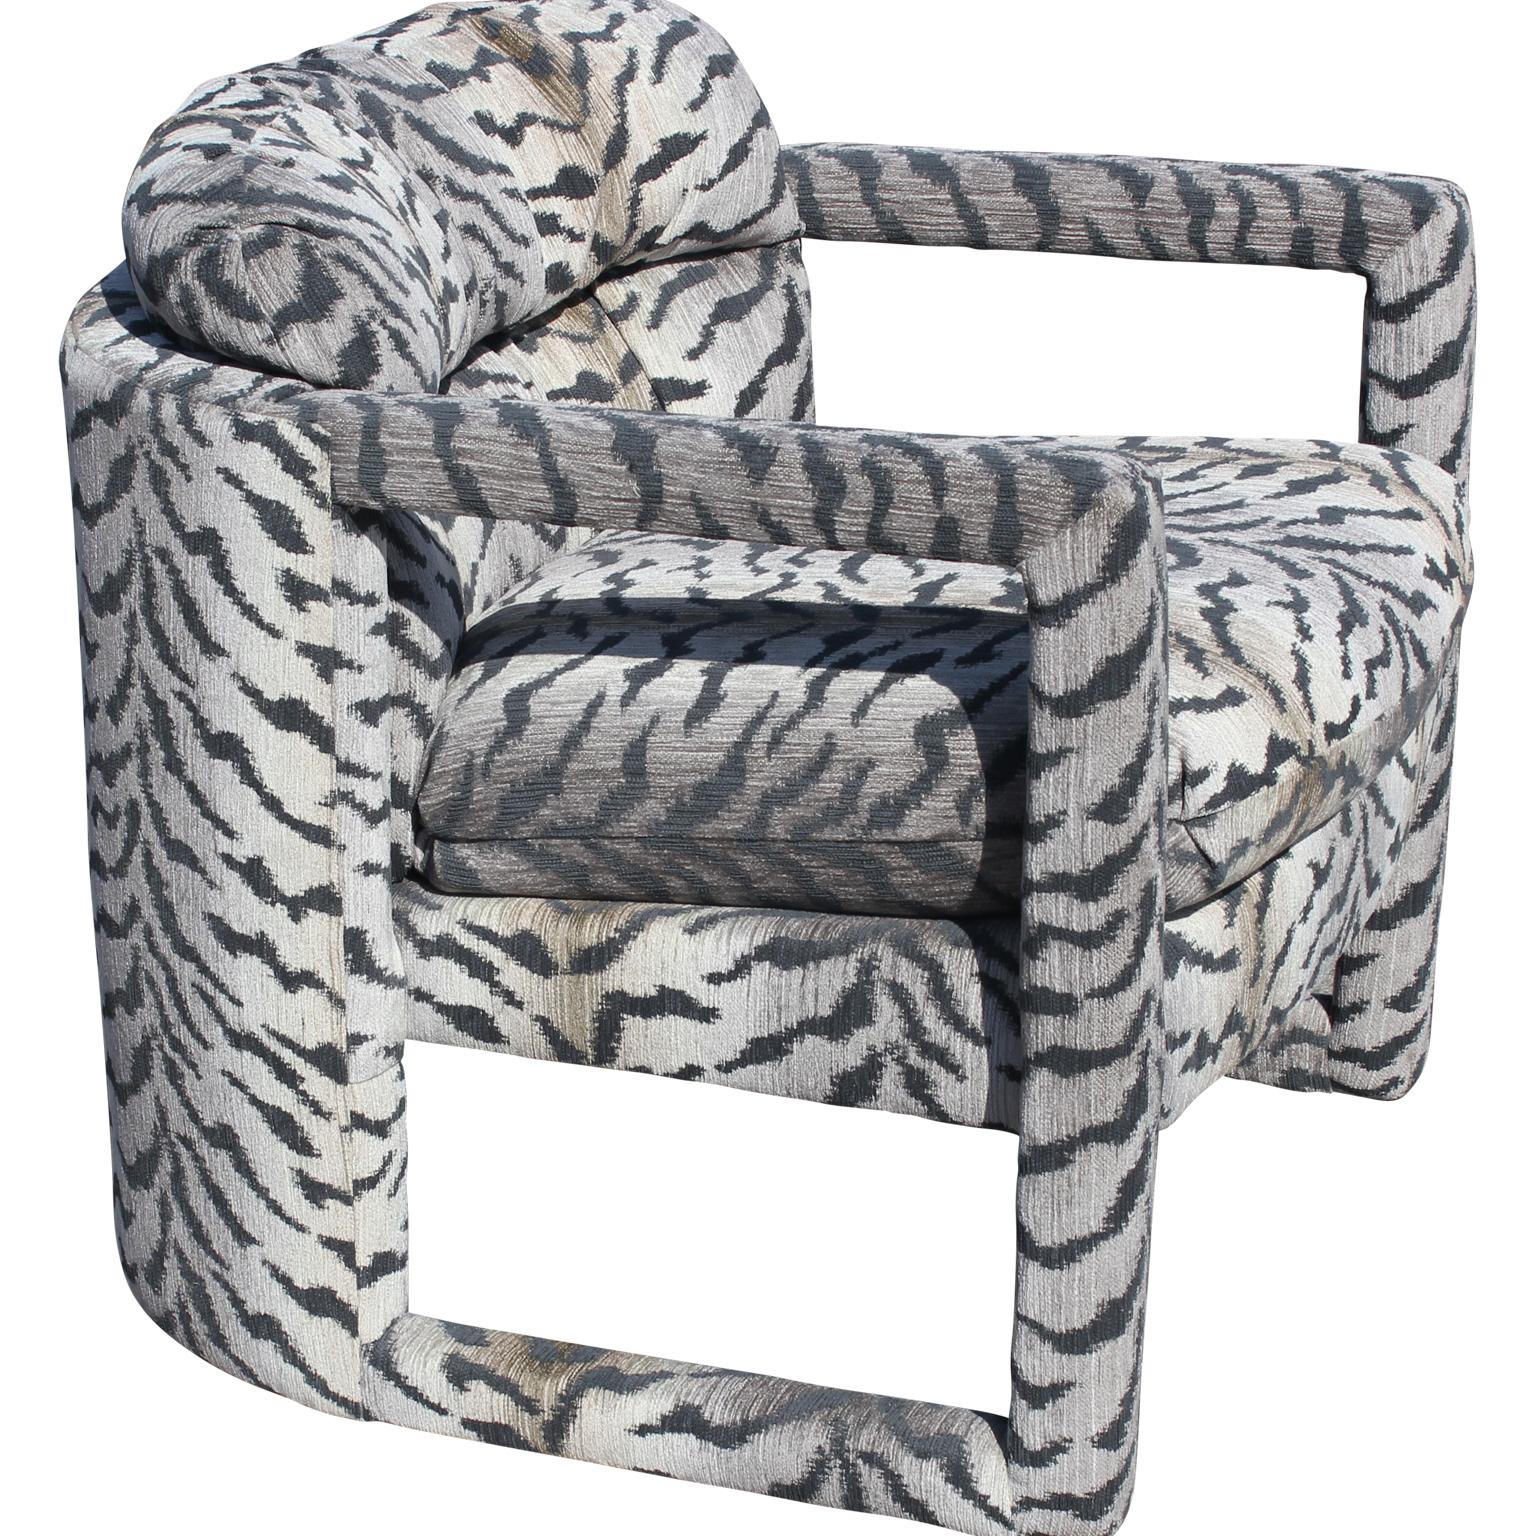 American Pair of Modern Barrel Back Parson Style Club Chairs by Drexel in Tiger Print